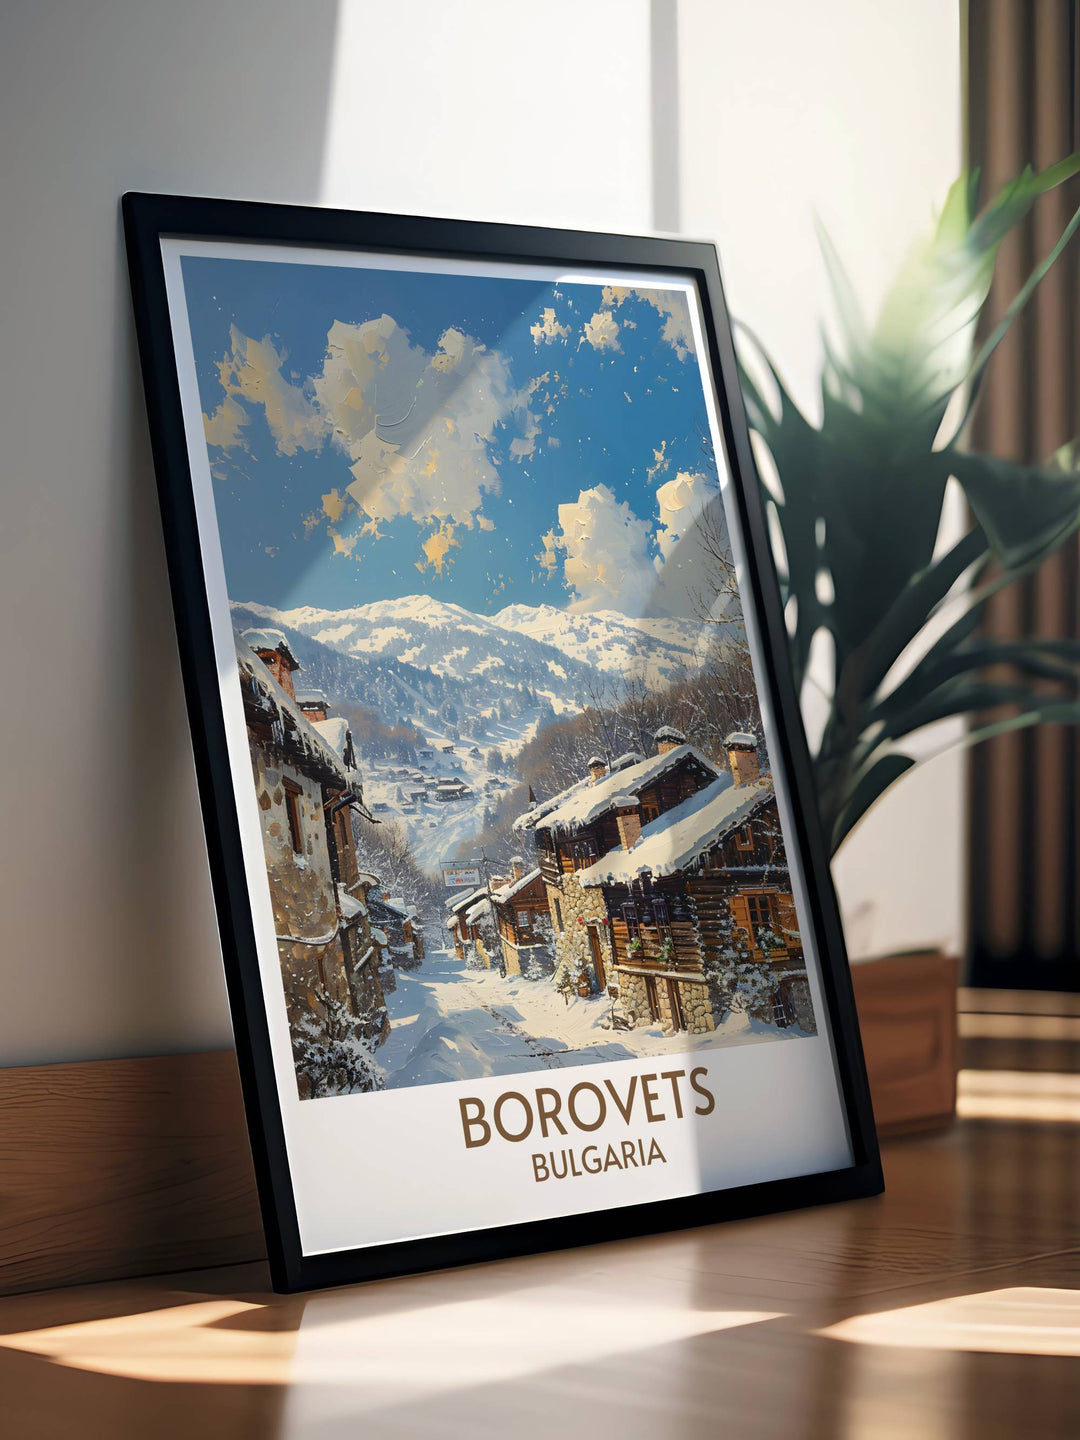 Retro style skiing poster featuring Borovets Bulgaria winter scene with ski lifts and mountain views ideal for skiing artwork collectors